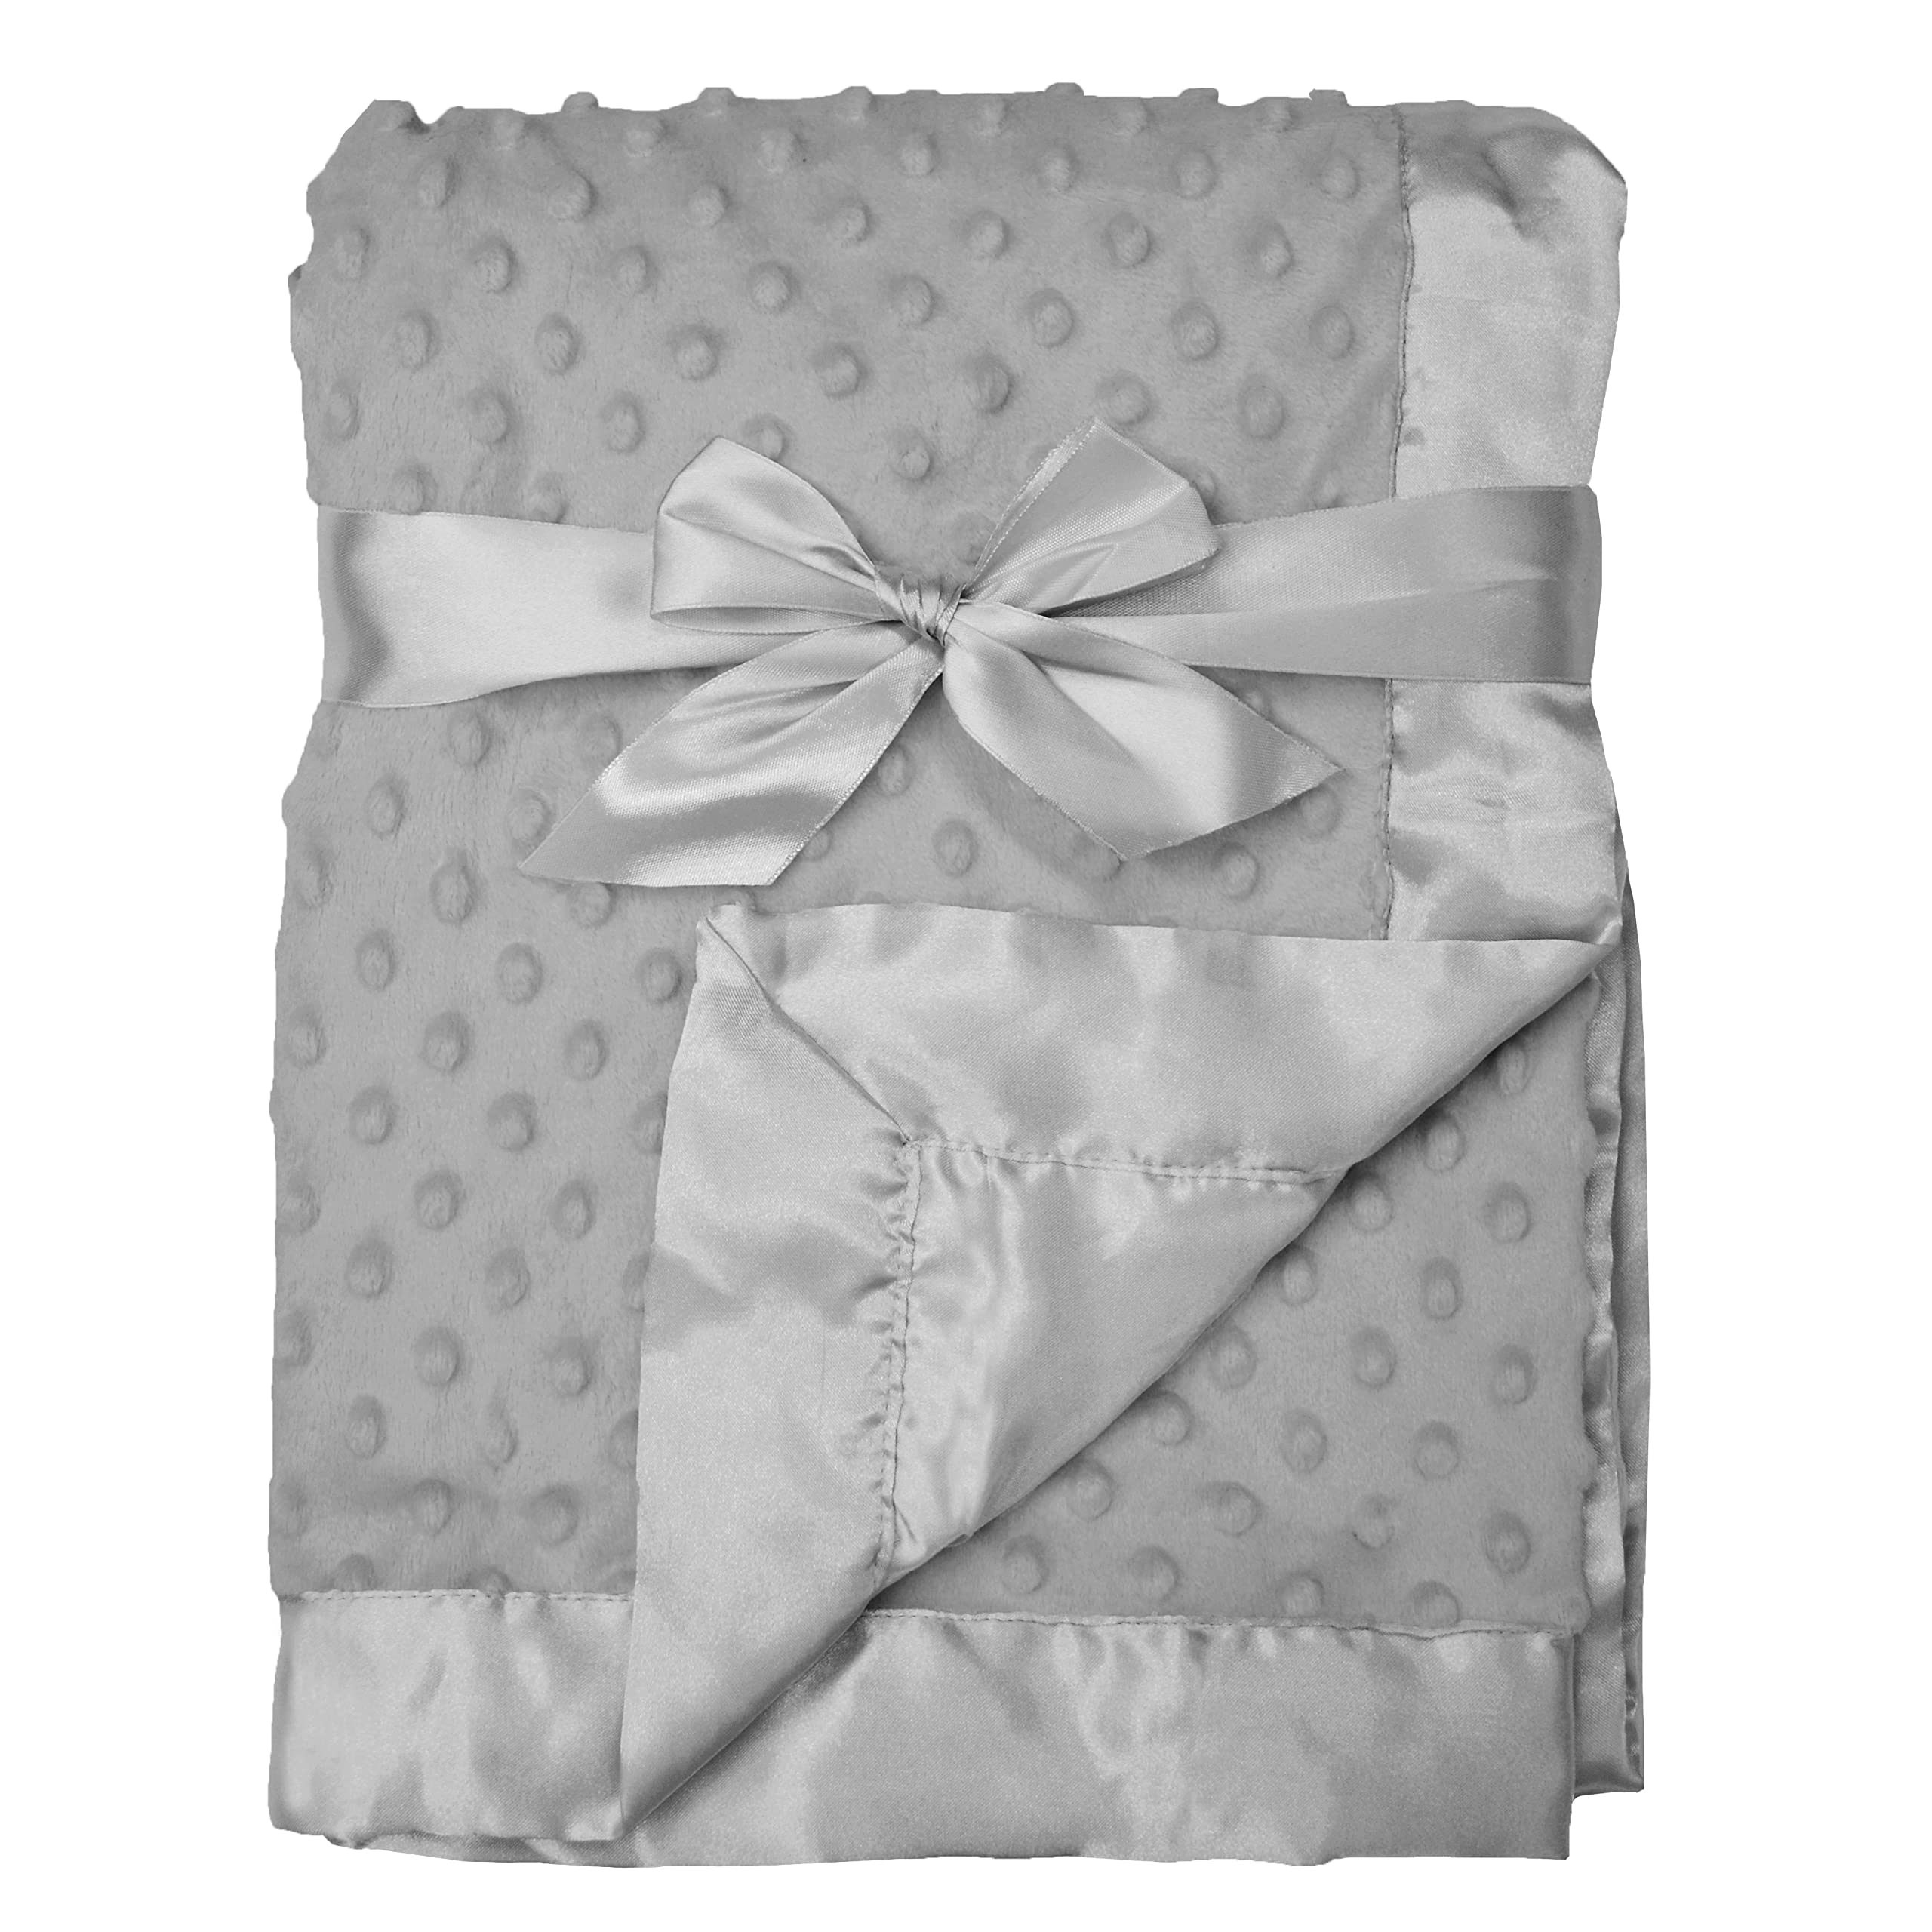 American Baby Company Heavenly Soft Chenille Minky Dot Receiving Blanket with Silky Satin Backing, Gray, 30